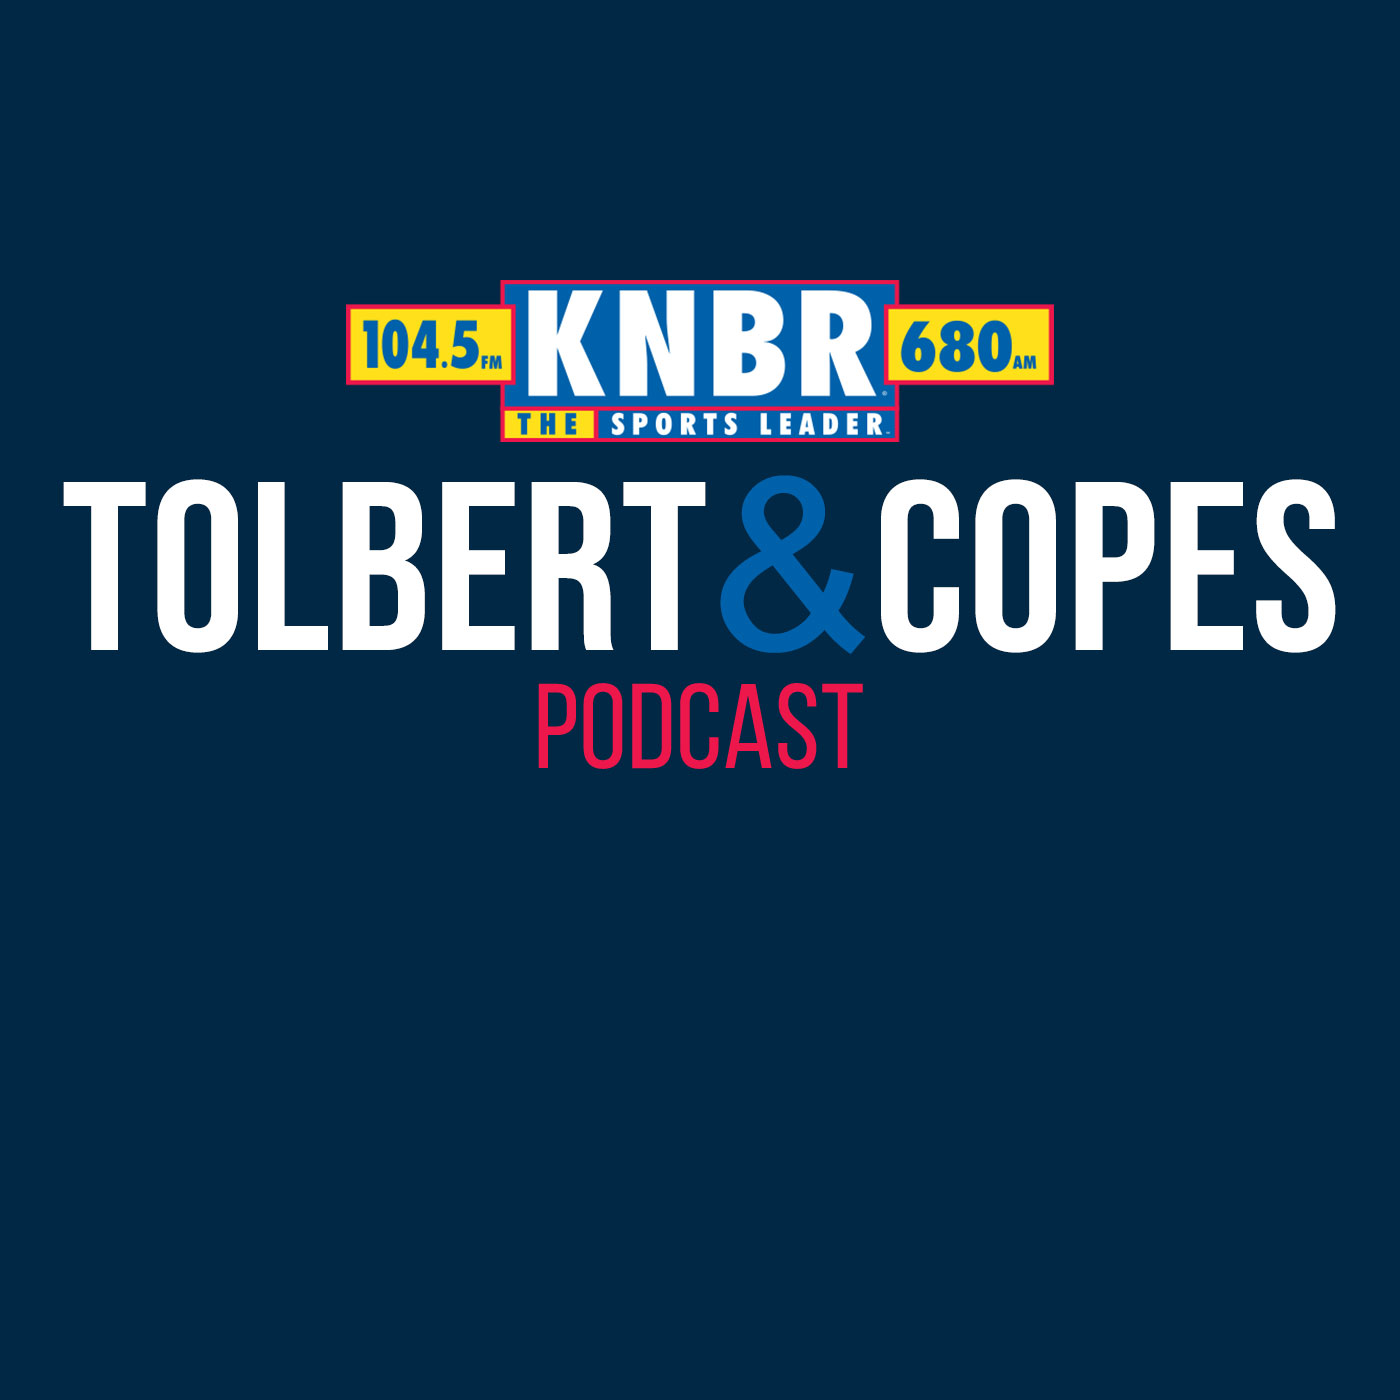 4-29 Andrew Baggarly joins Tolbert & Copes to discuss the Giants pitching & upcoming road trip